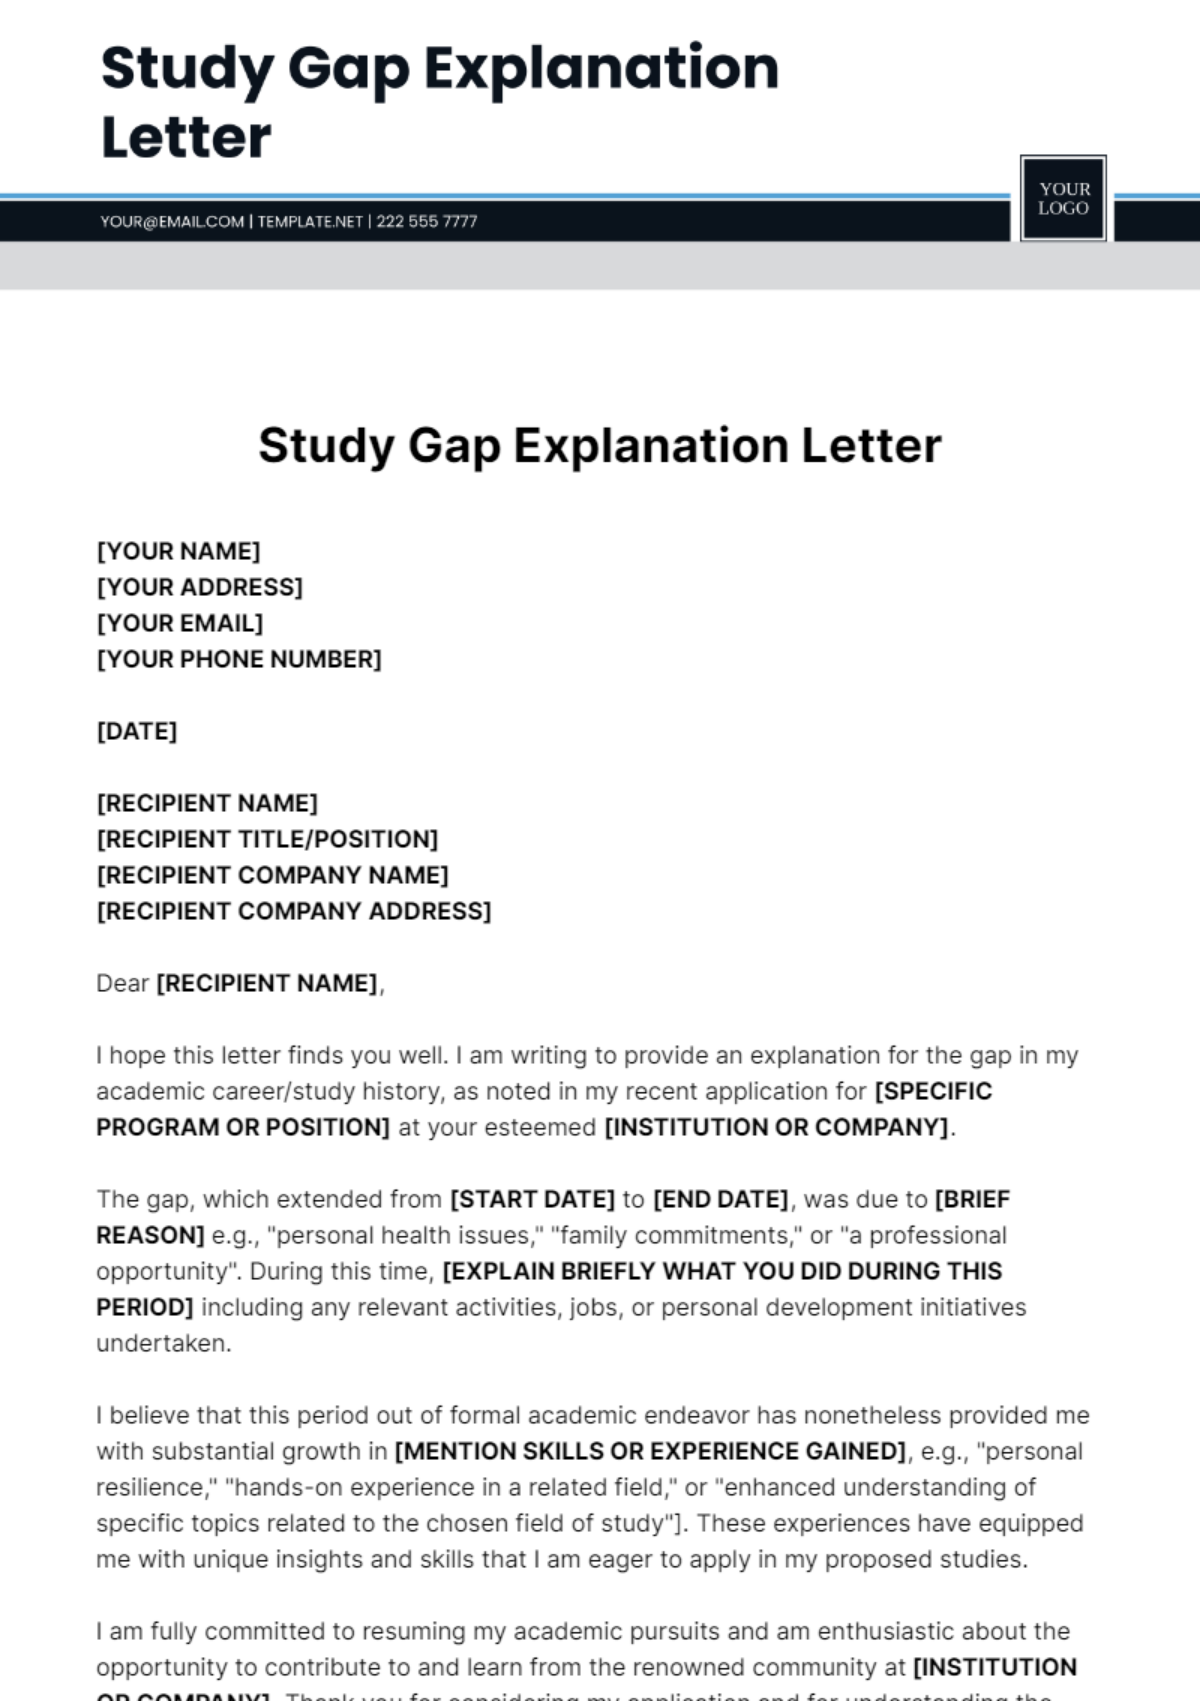 Study Gap Explanation Letter Template